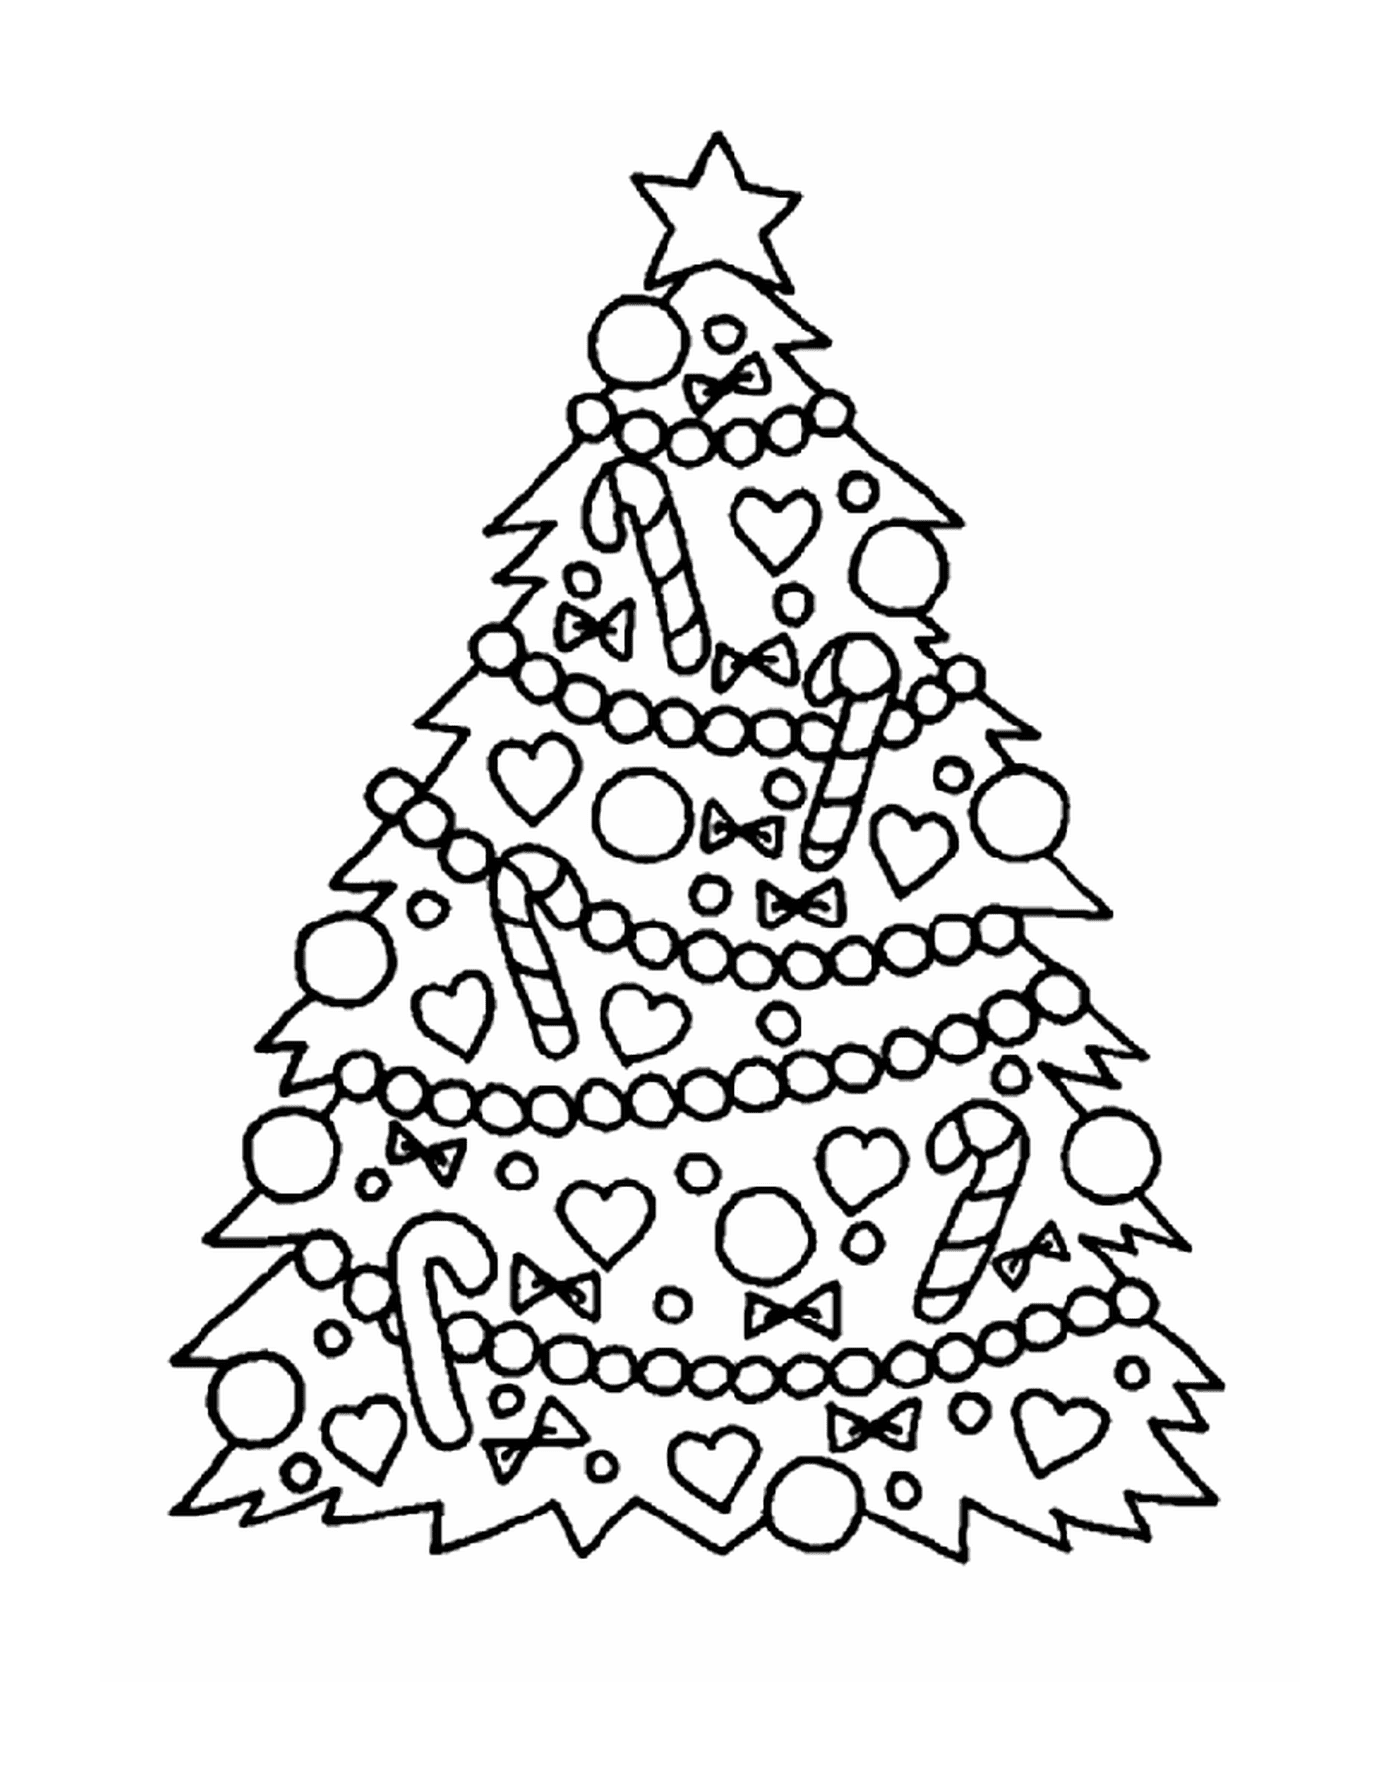  A Christmas tree decorated with candy and hearts 